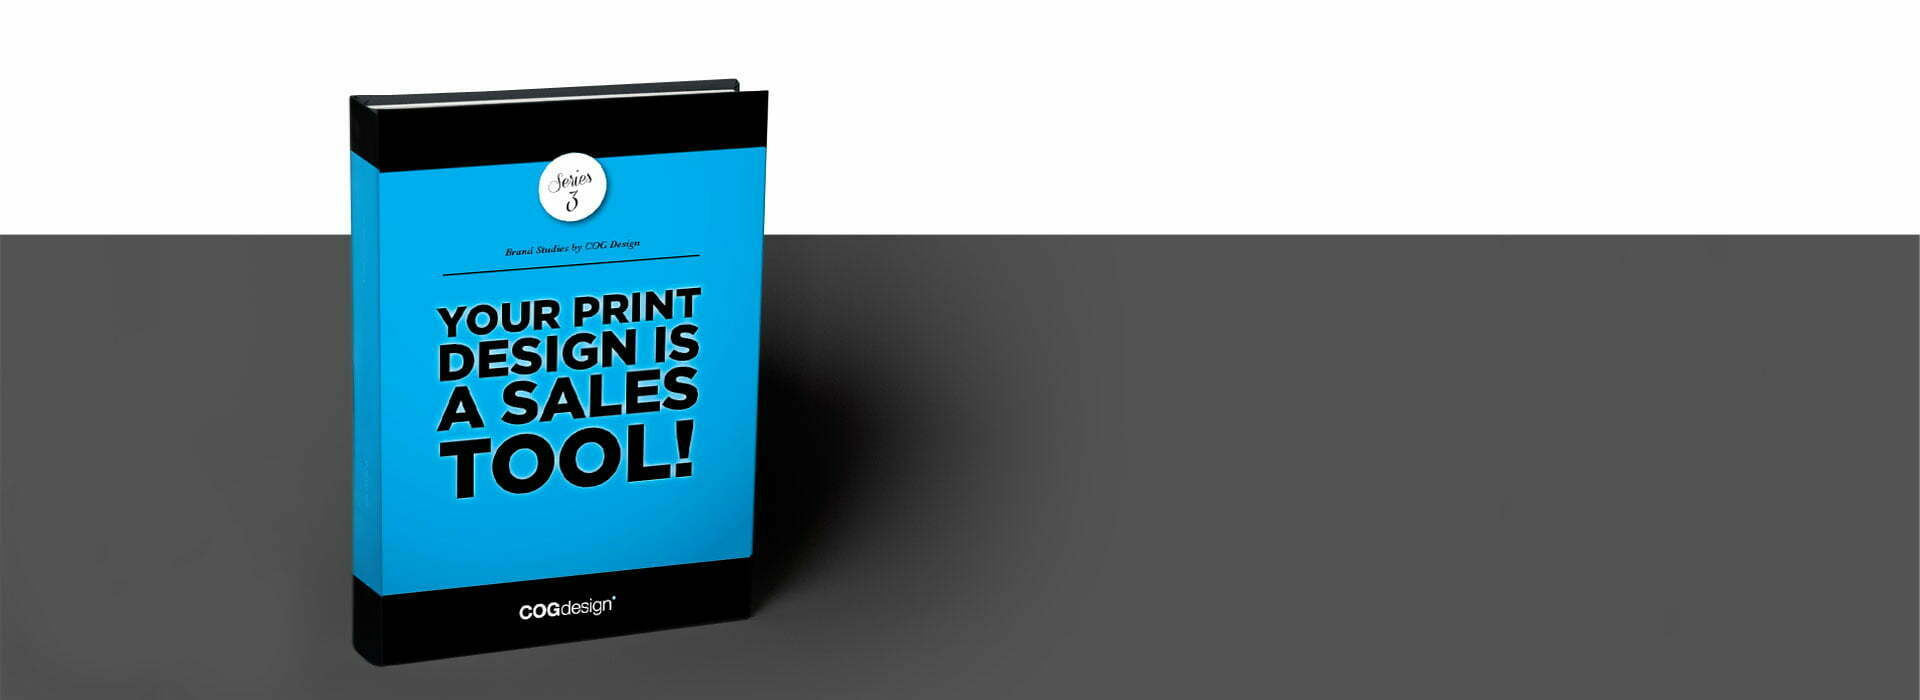 Why Your Branded Print Design is a Sales Tool | COG Design